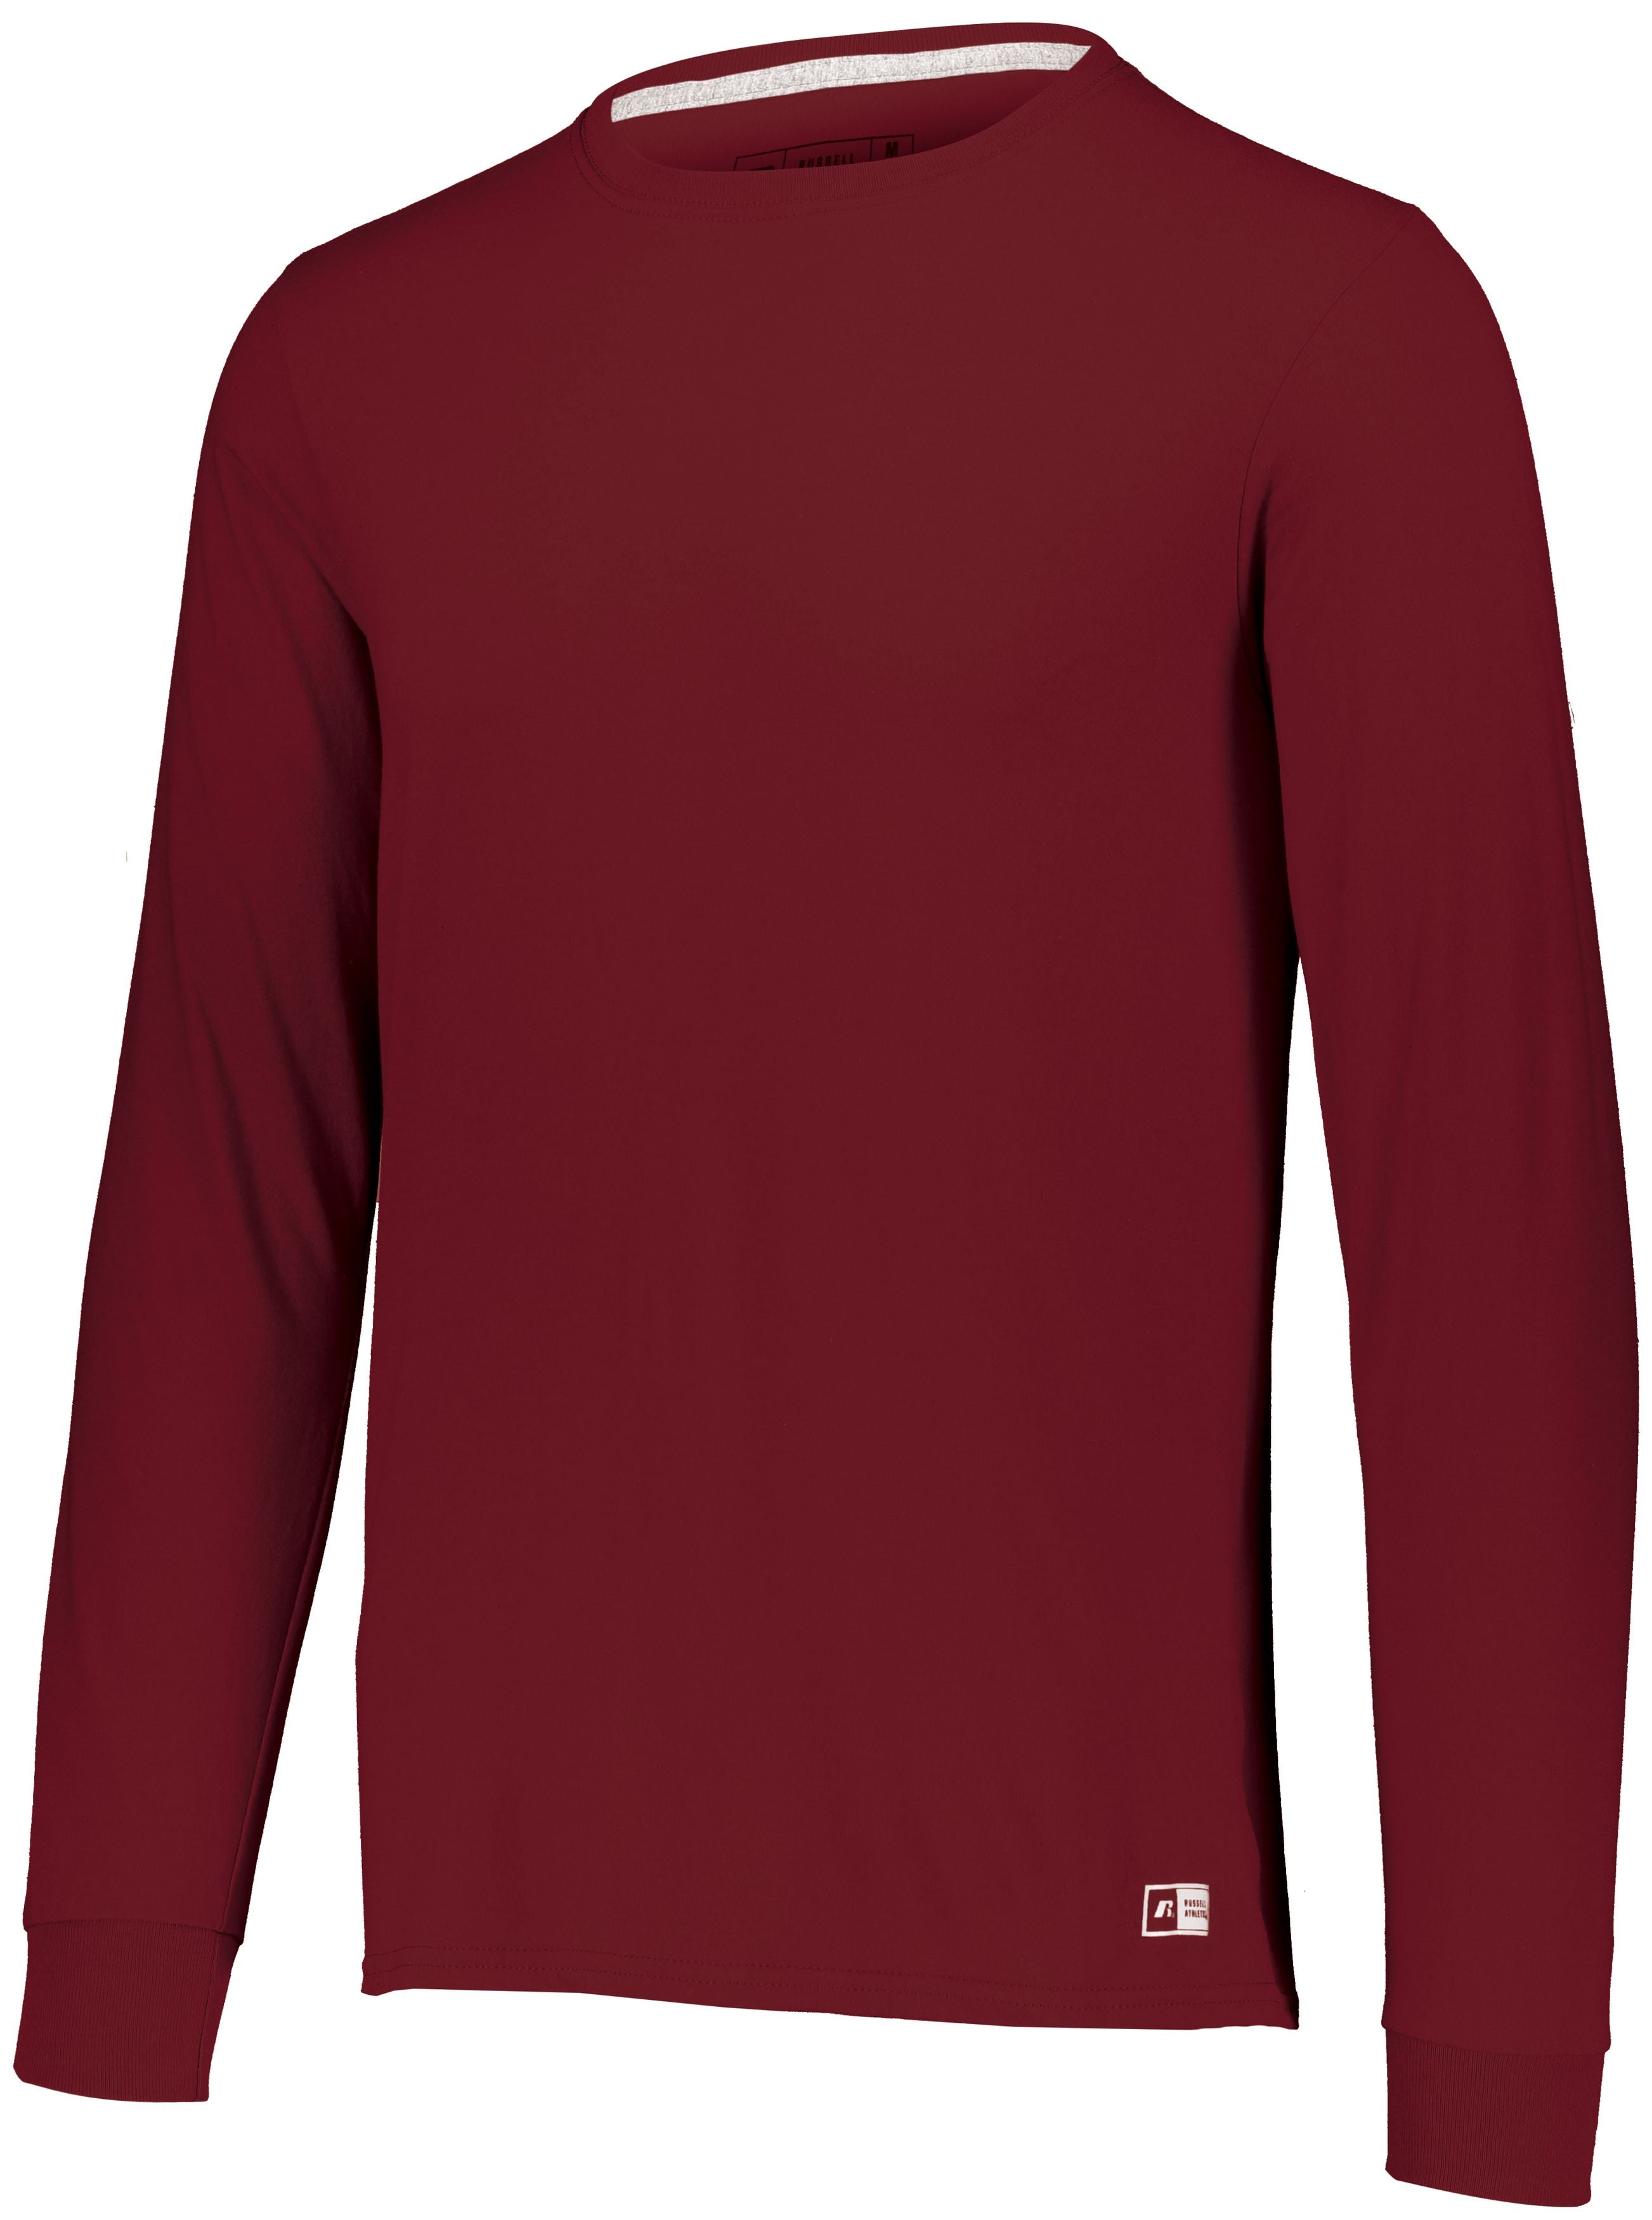 Russell Athletic Essential Long Sleeve Tee in Cardinal  -Part of the Adult, Adult-Tee-Shirt, T-Shirts, Russell-Athletic-Products, Shirts product lines at KanaleyCreations.com